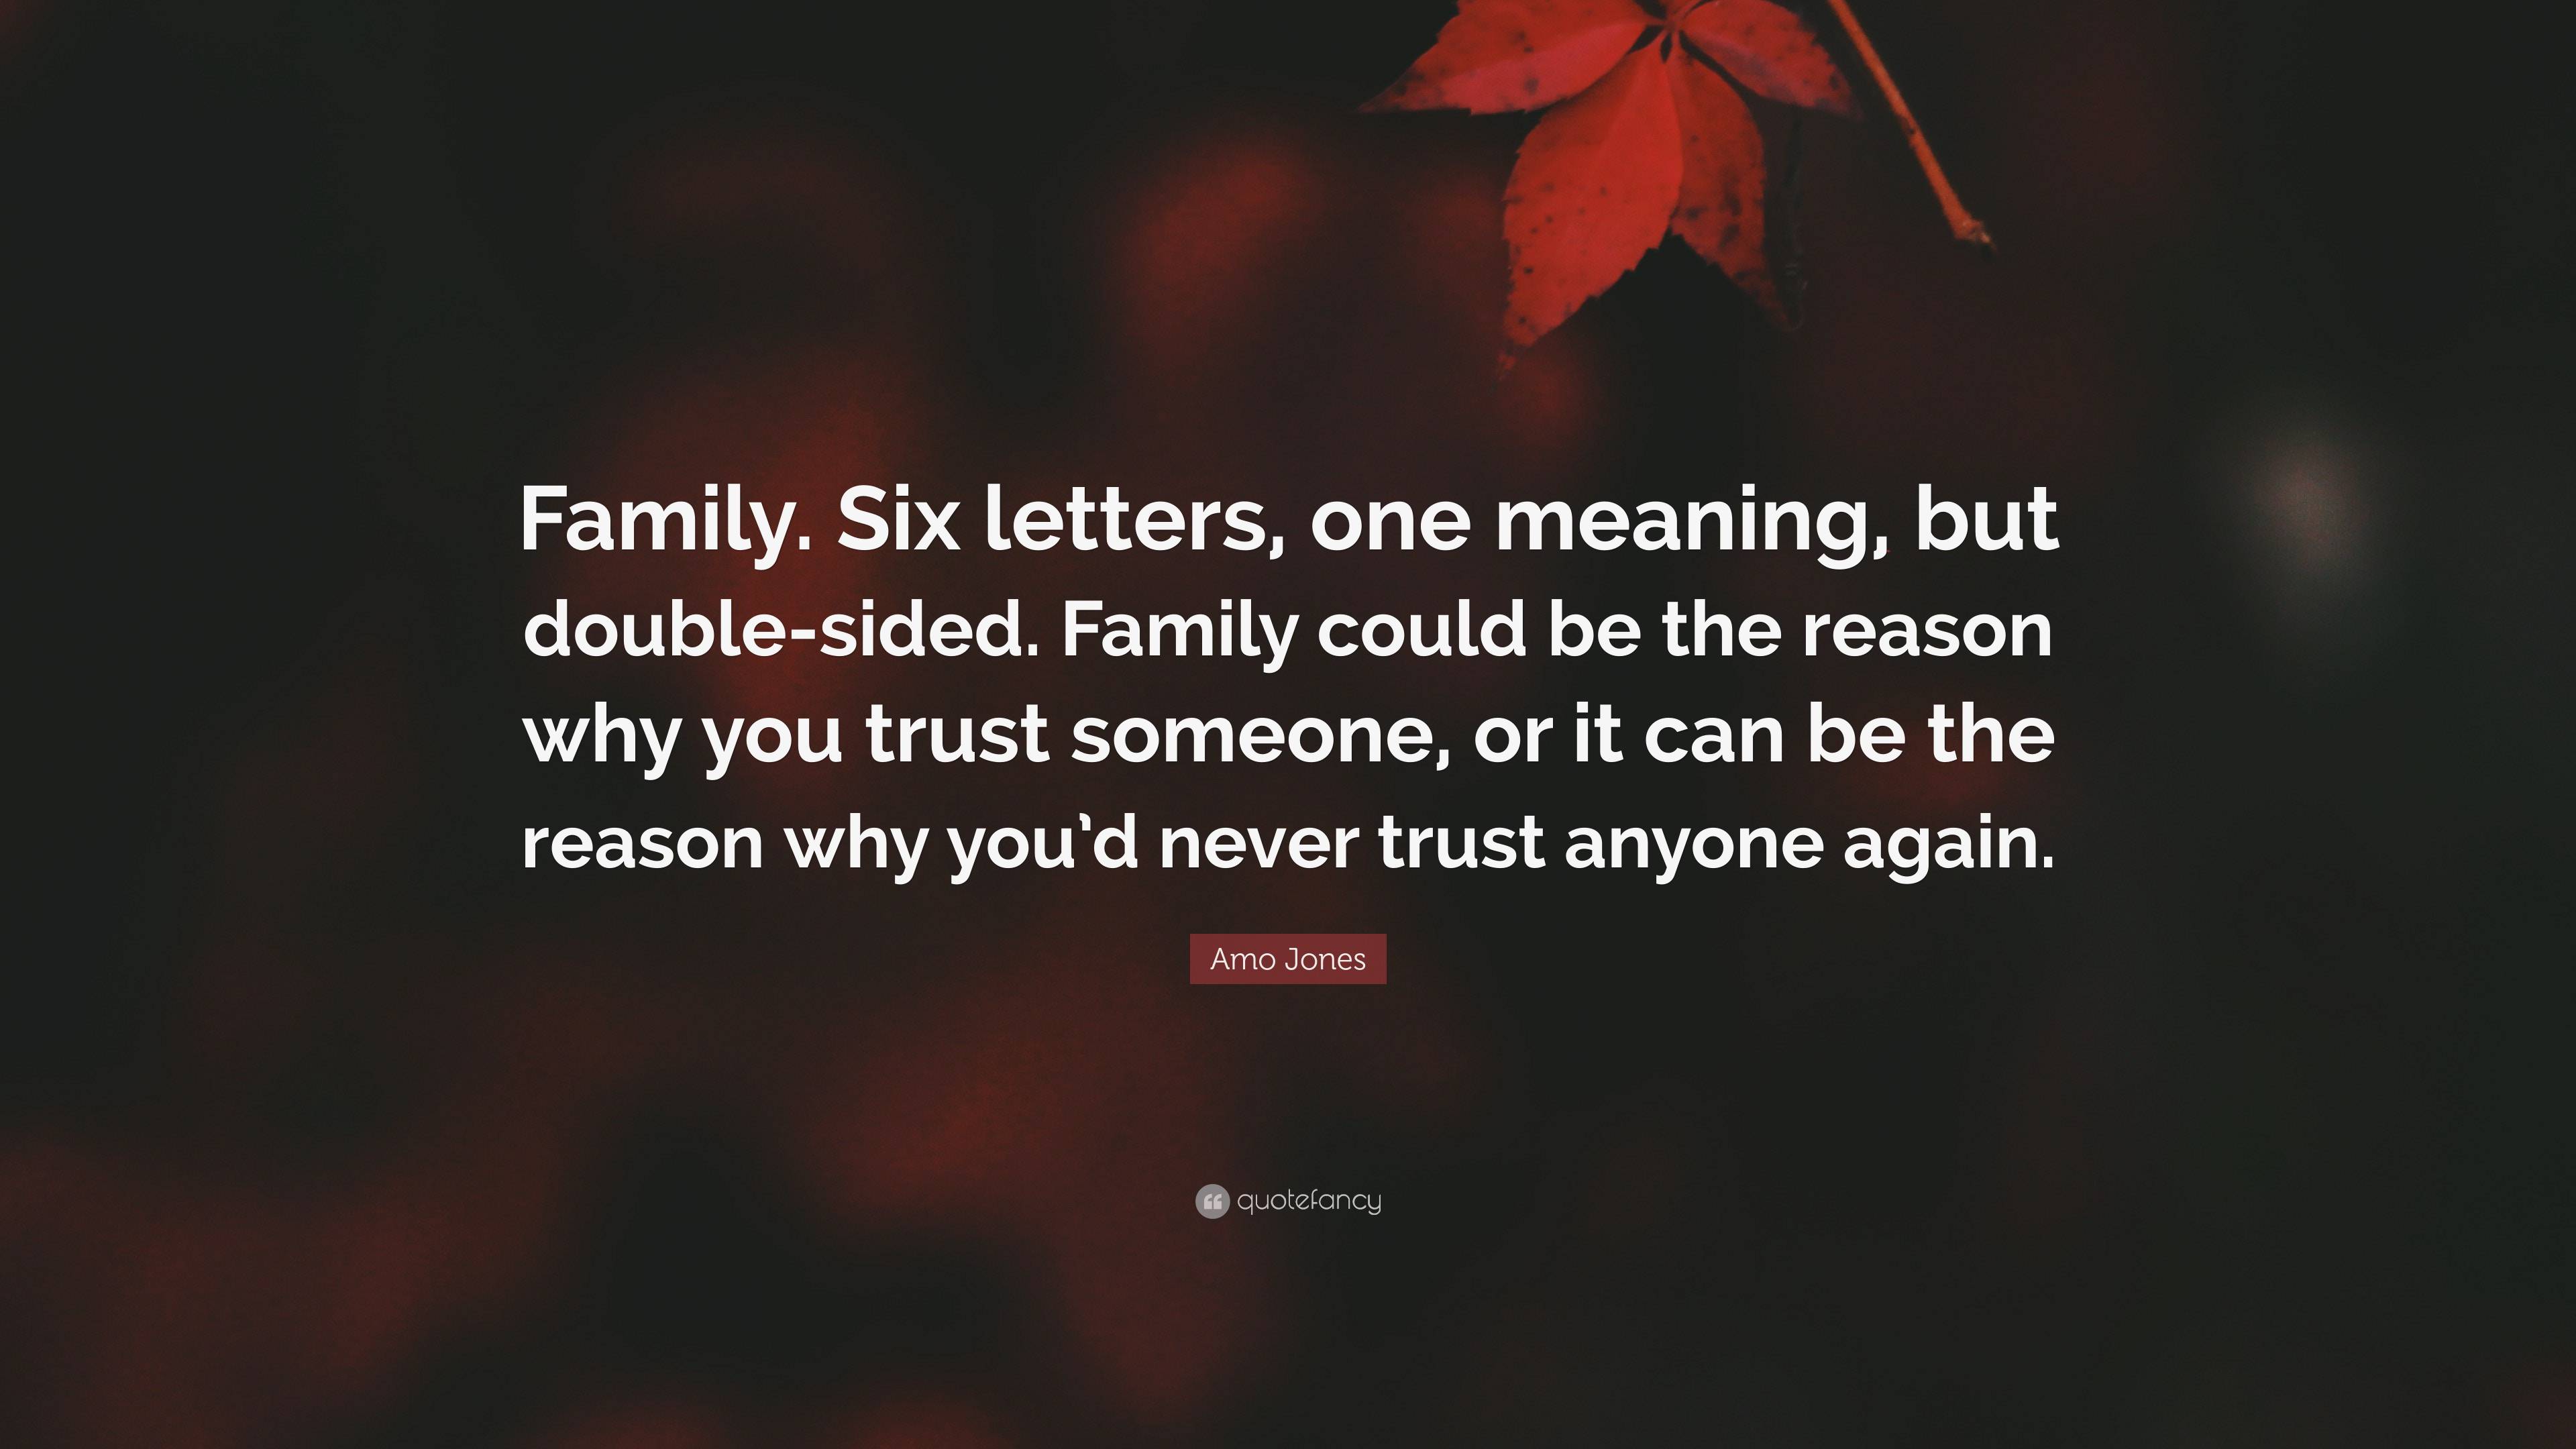 Amo Jones Quote: “Family. Six letters, one meaning, but double-sided.  Family could be the reason why you trust someone, or it can be the r”